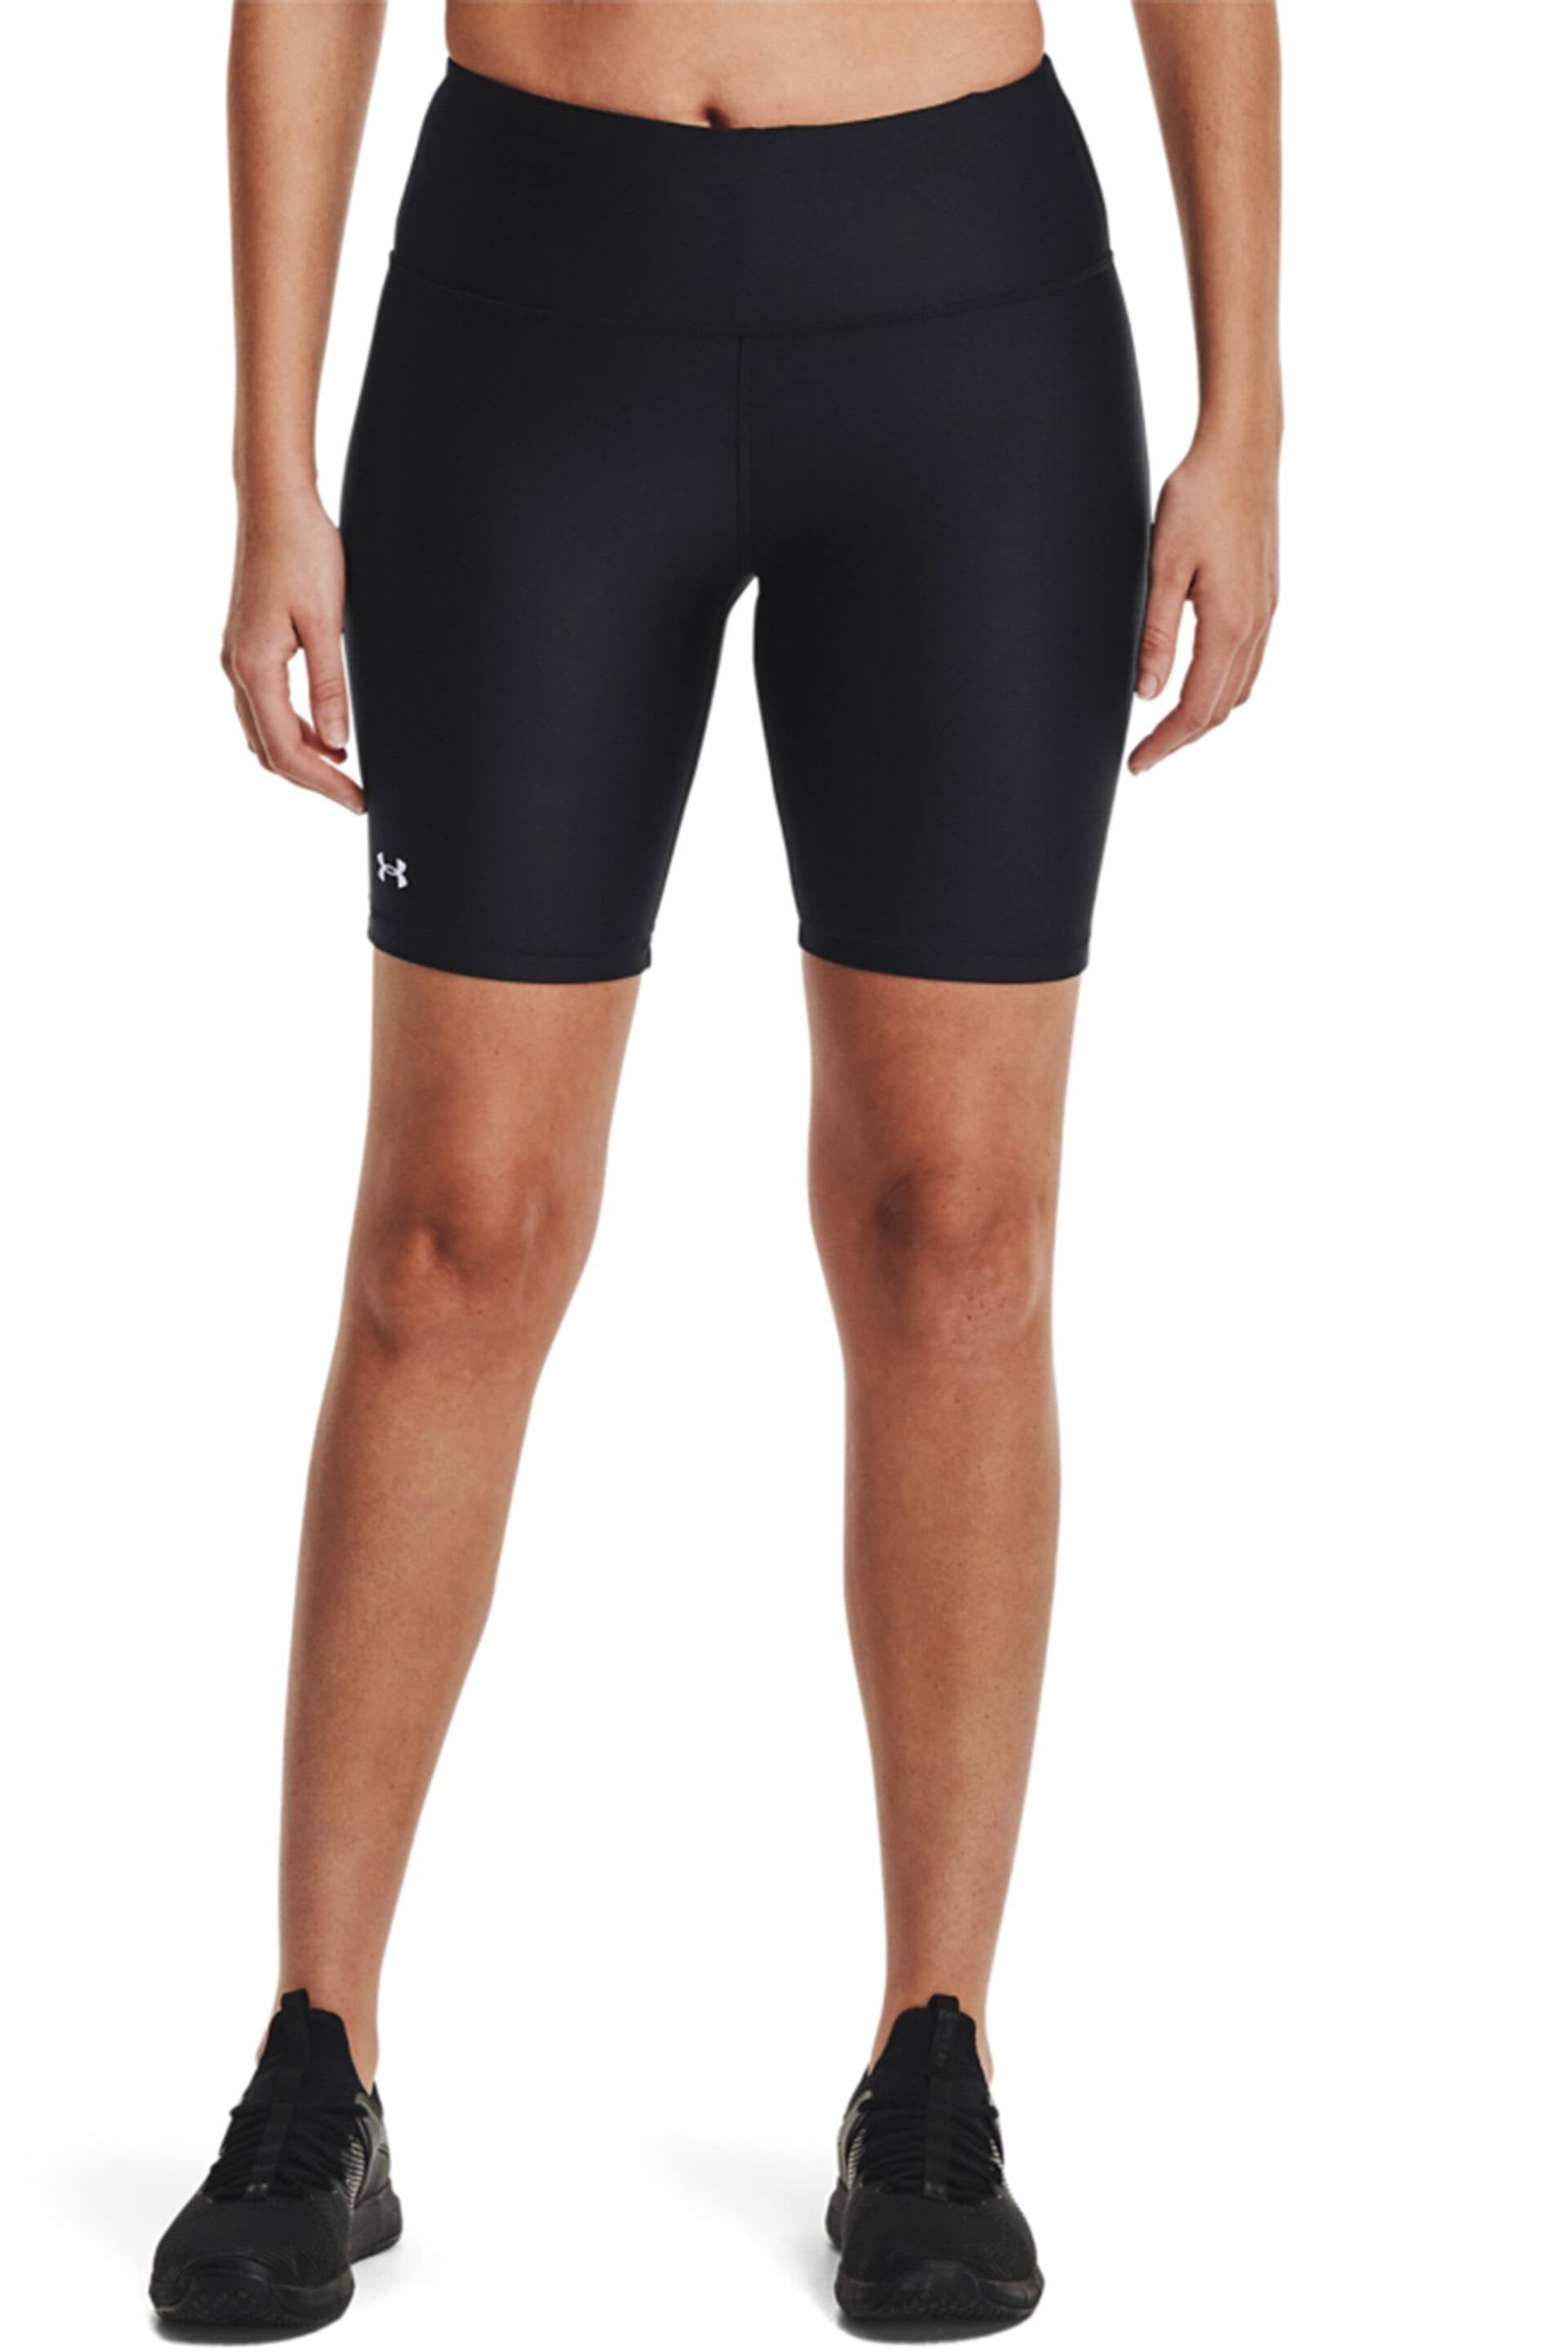 Under Armour HG Armour Cycling Shorts - Image 1 of 5